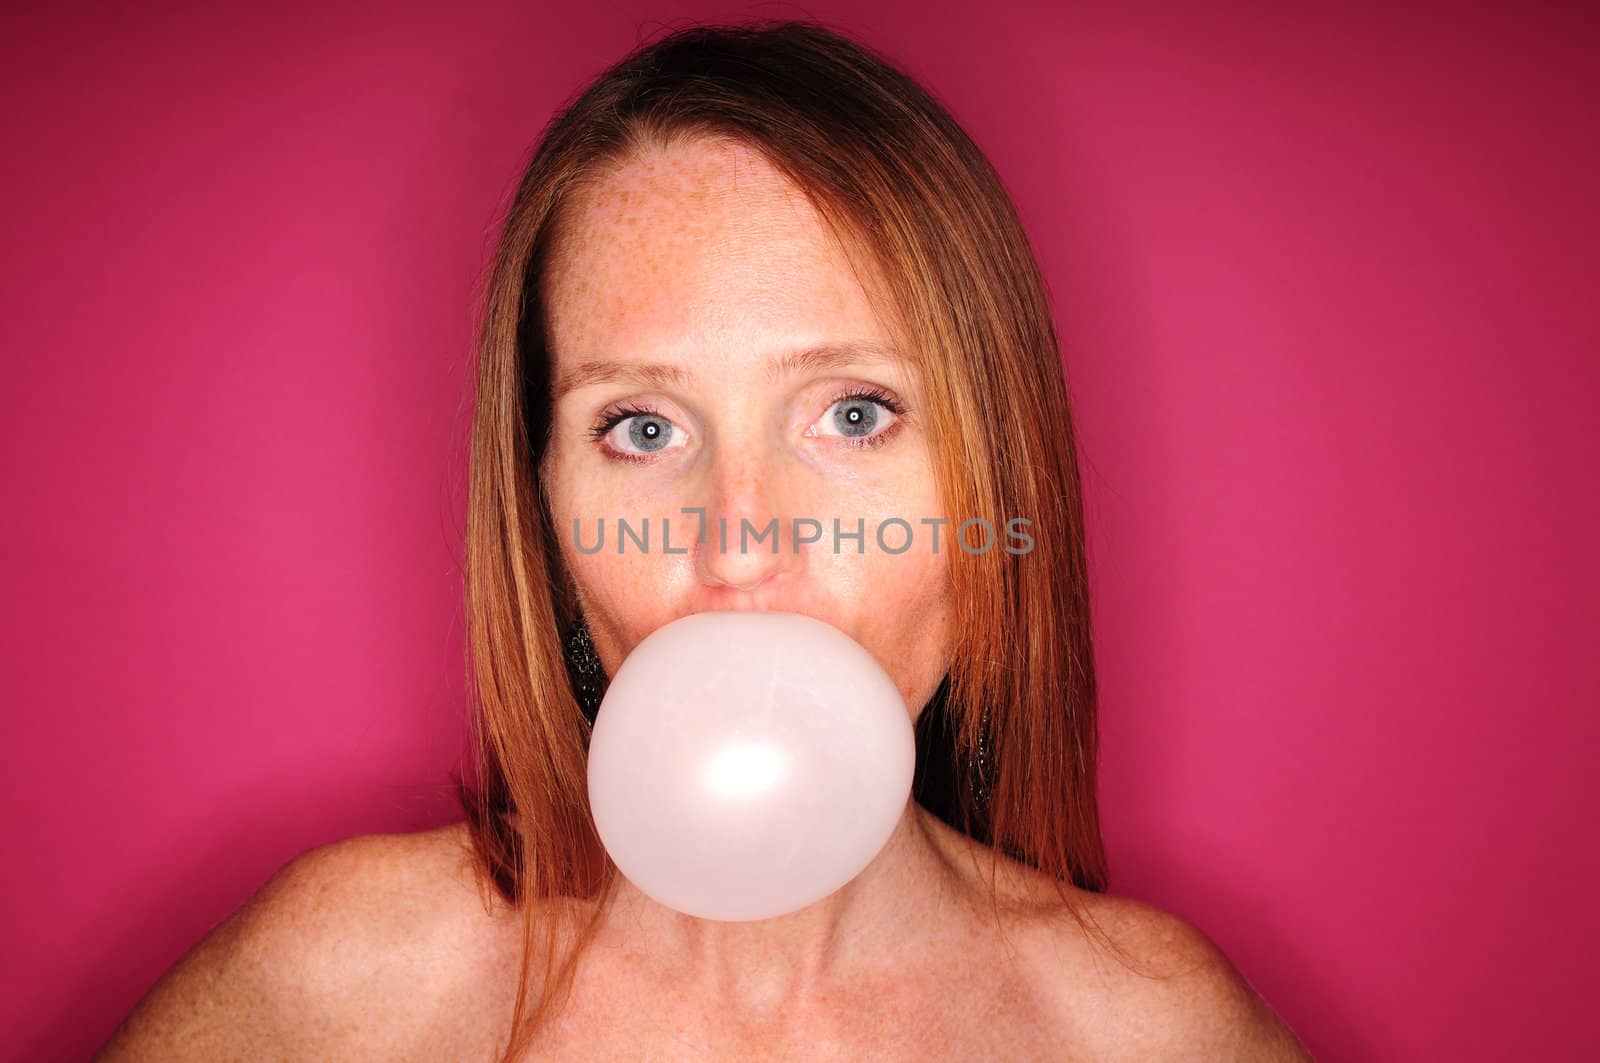 Young woman blowing bubble on pink background by ftlaudgirl